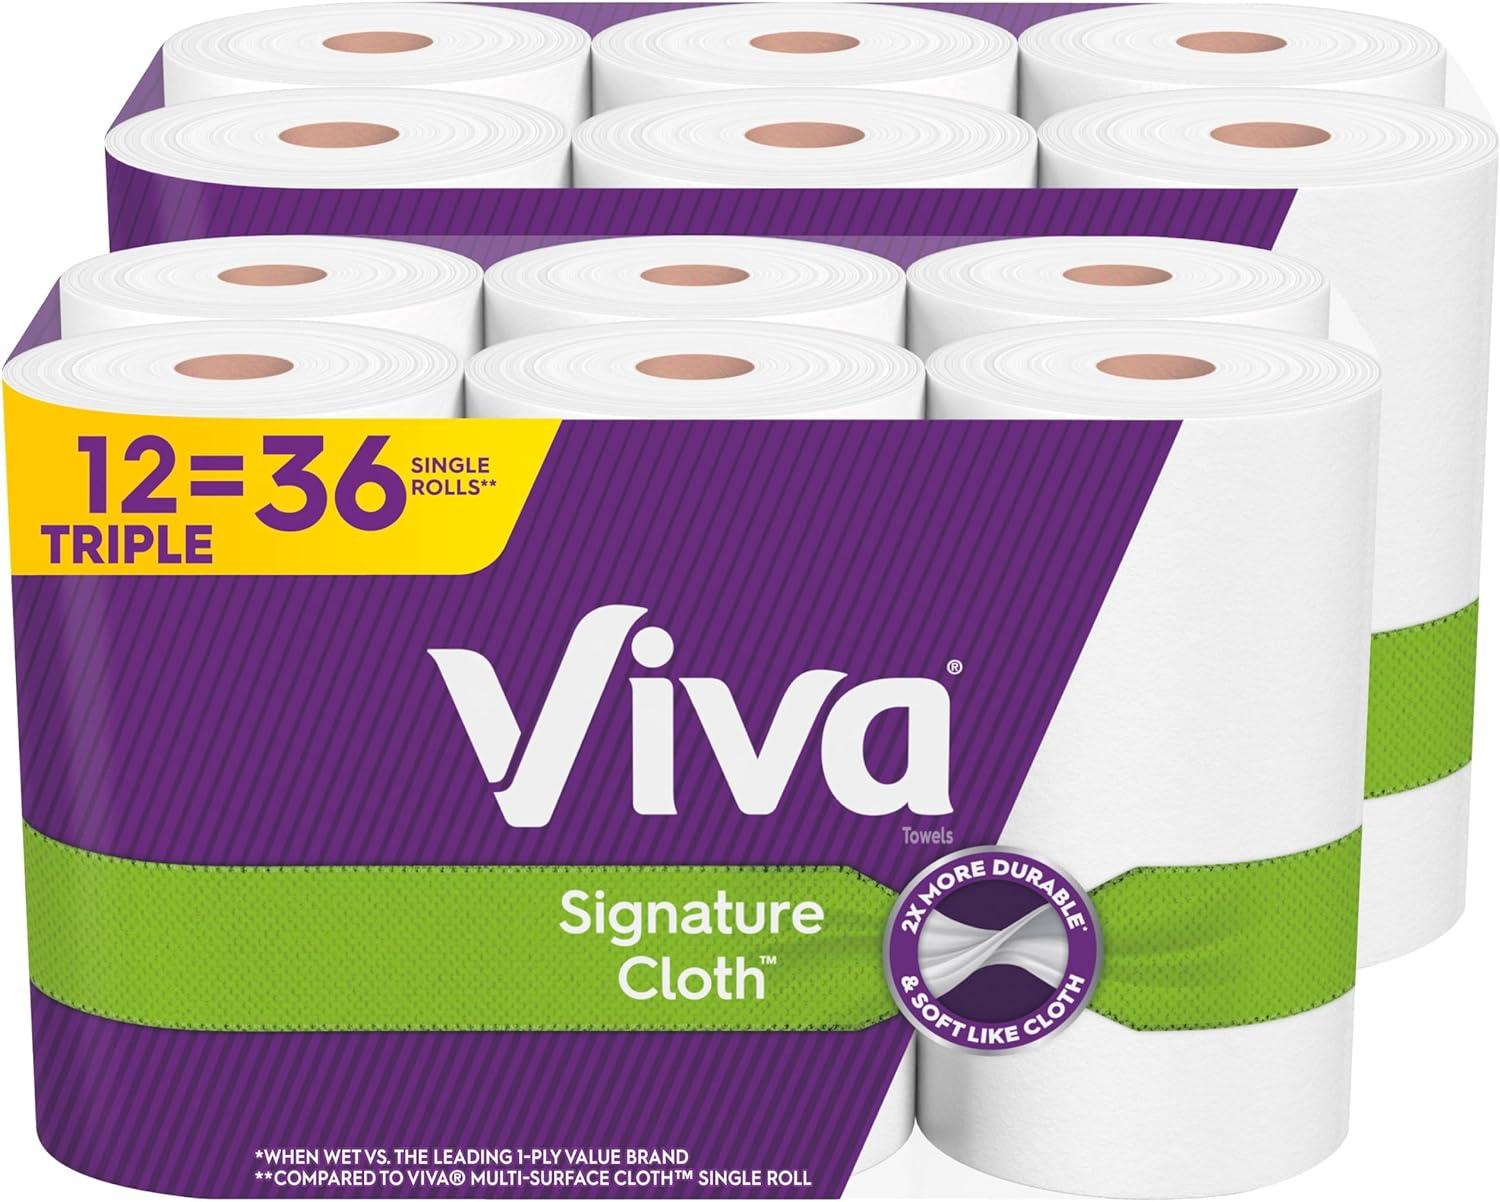 Viva Signature Cloth Paper Towels 12 Pack for $22.80